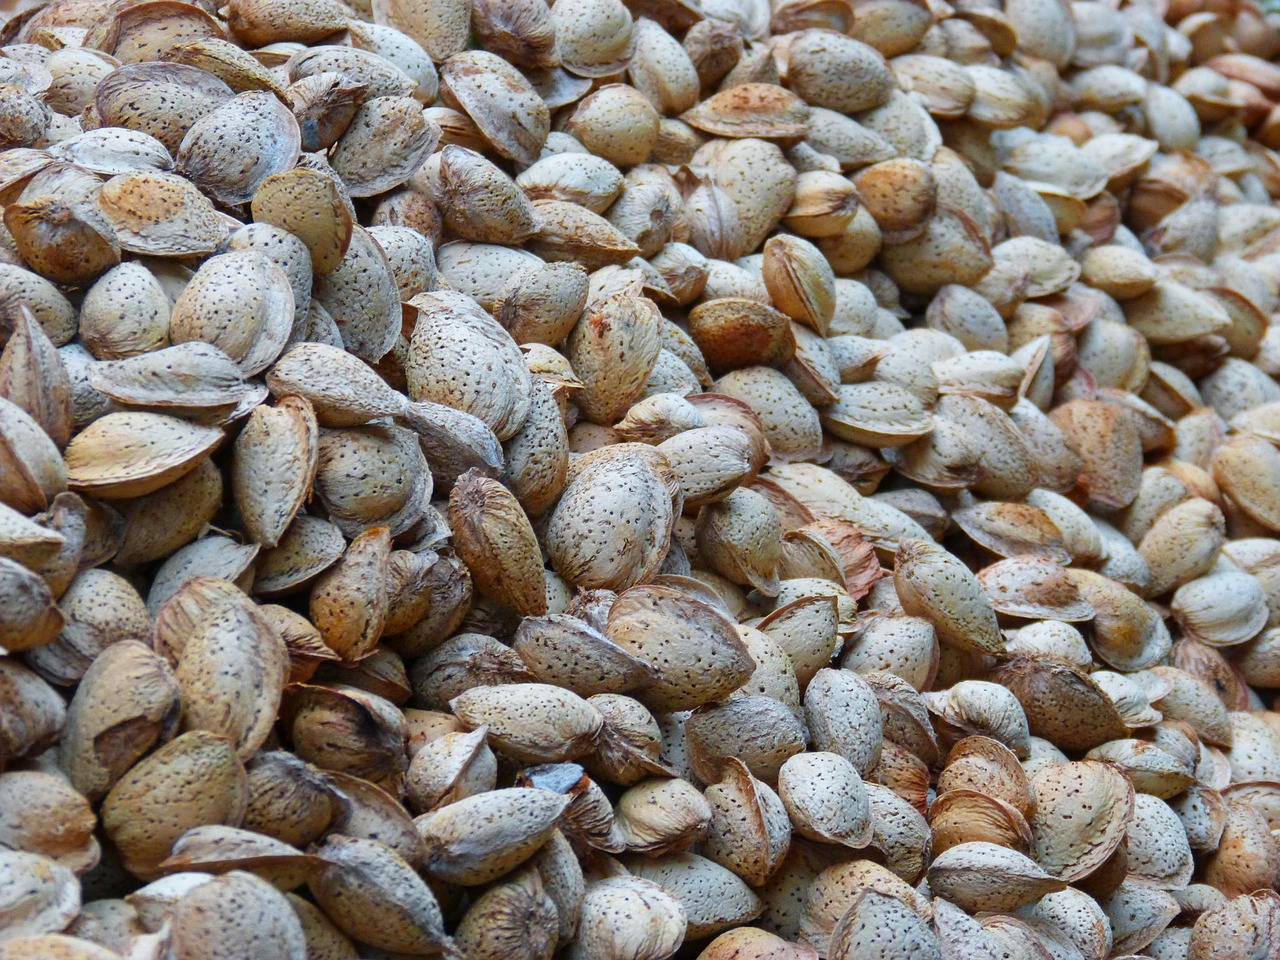 almonds dried fruits dry in the sun free photo